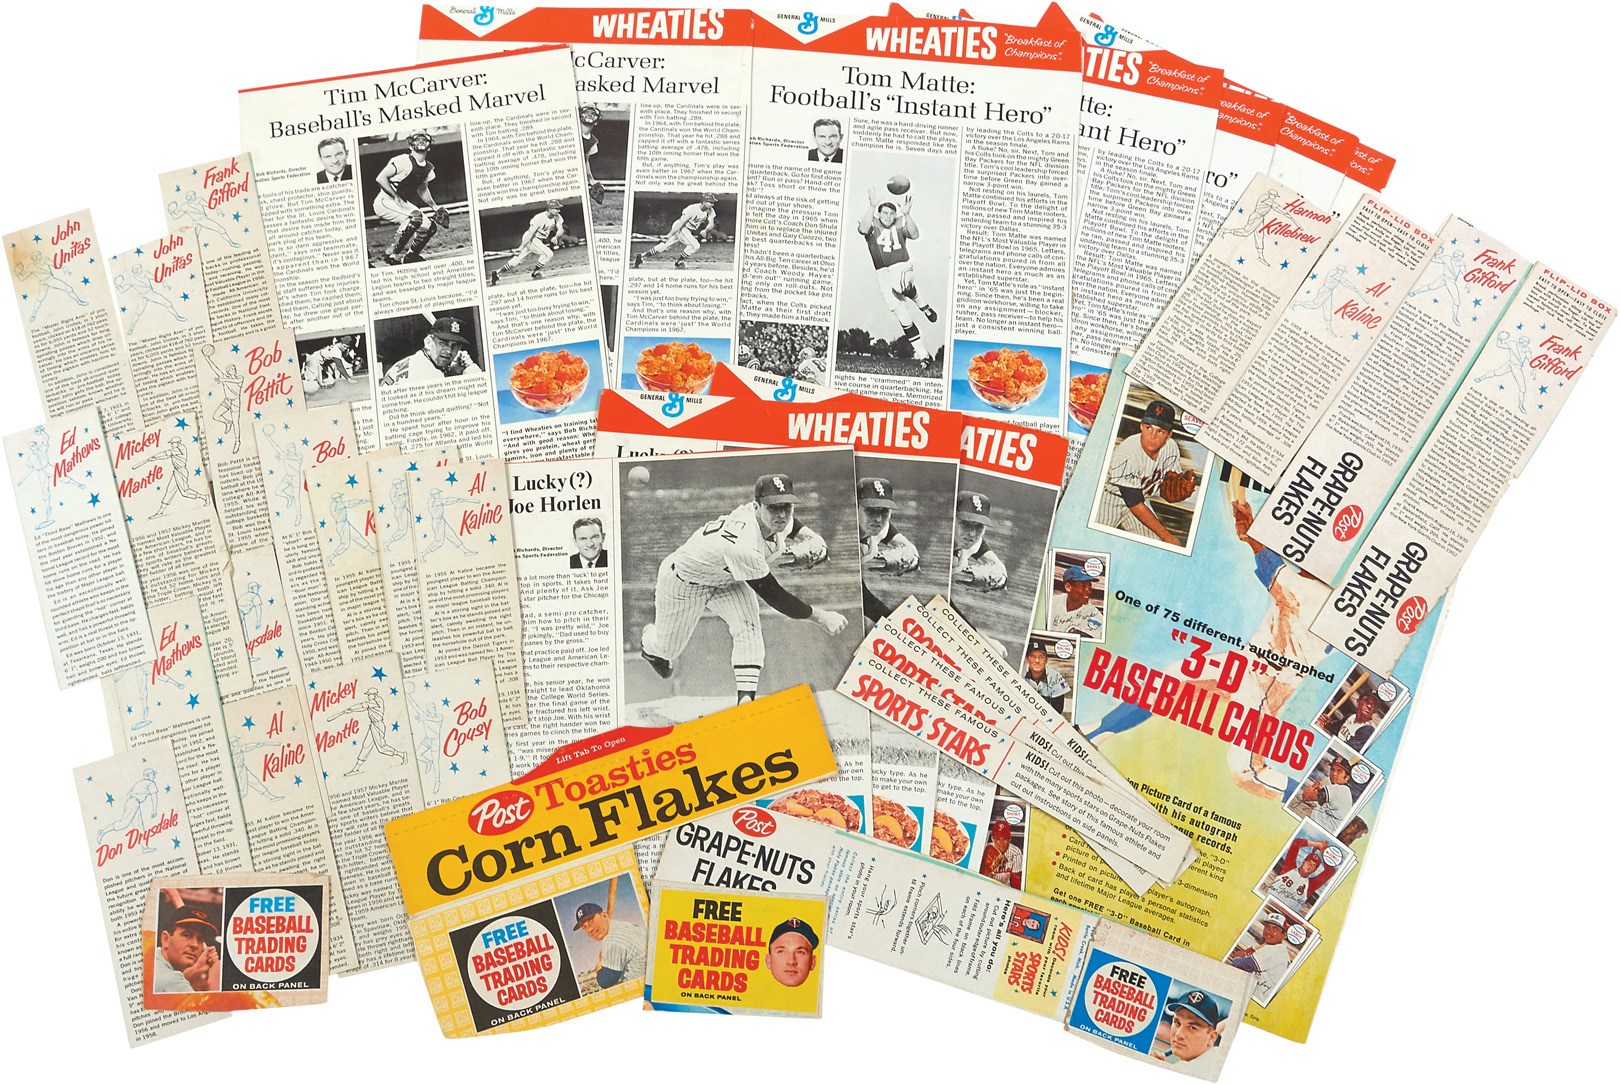 Baseball and Trading Cards - 1960s Post, Wheaties & Kellogg's Collection of Cereal Box Items